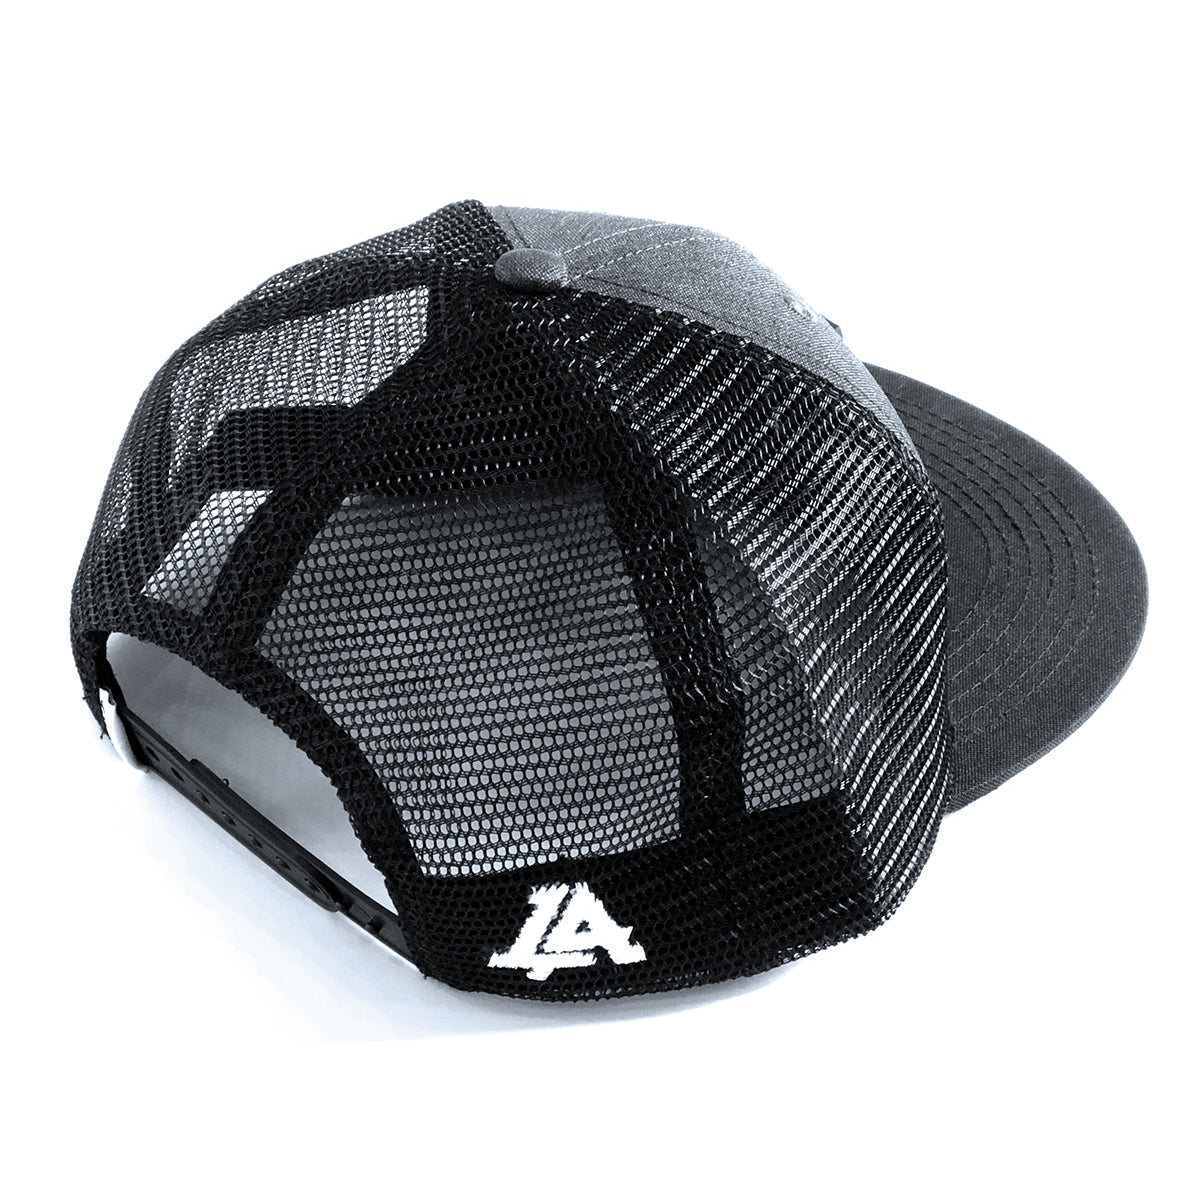 Lost Art Canada - grey and black patch snapback hat back view